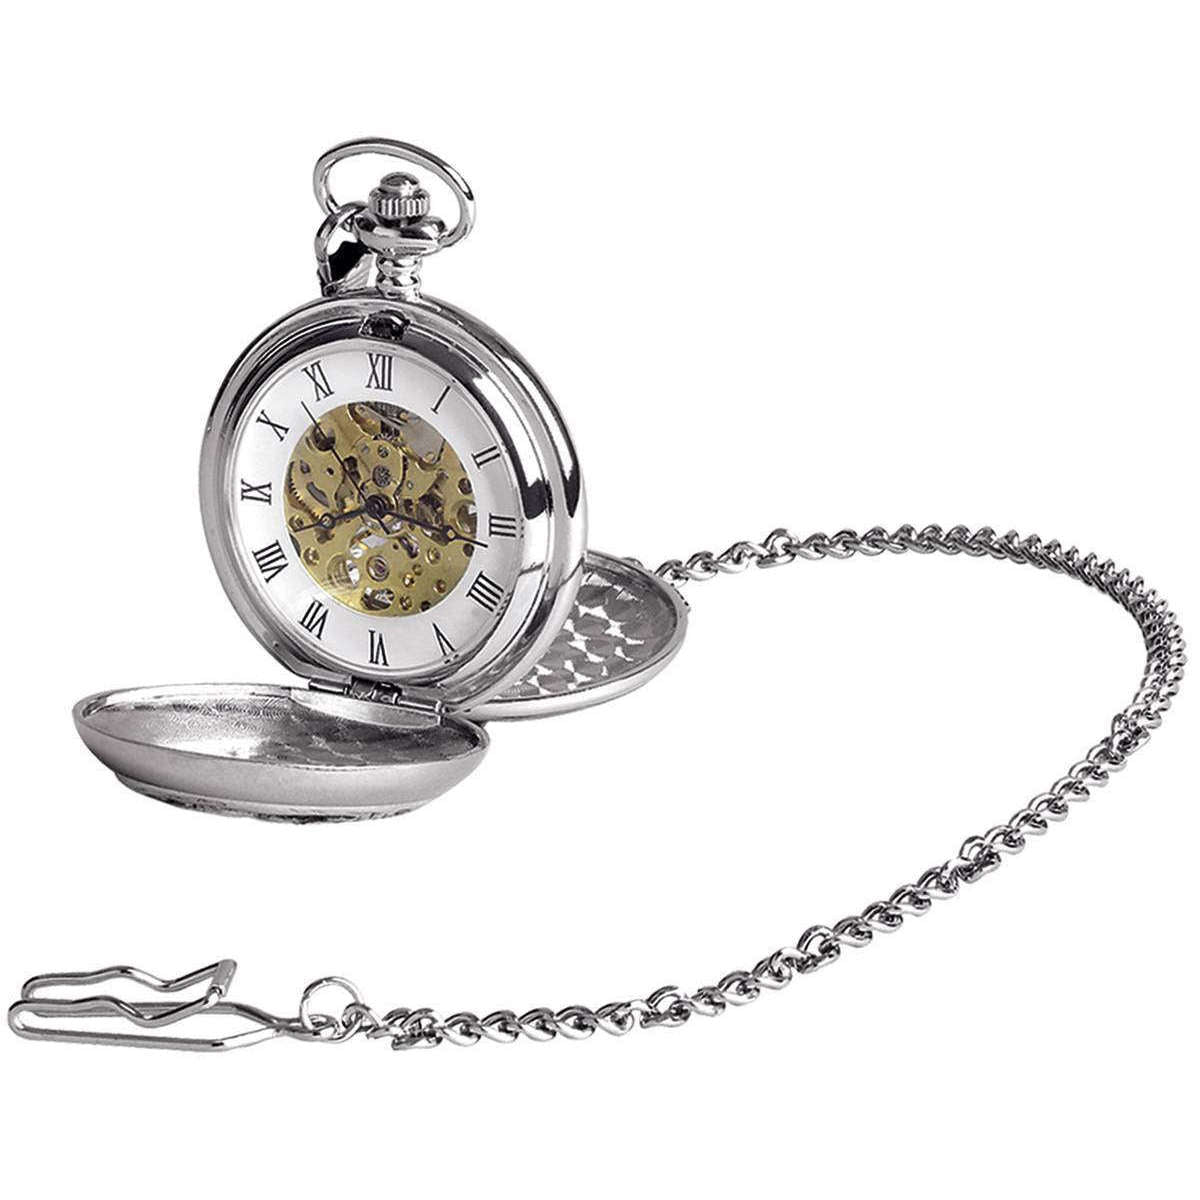 Woodford Monarch of the Glen Chrome Plated Double Full Hunter Skeleton Pocket Watch - Silver